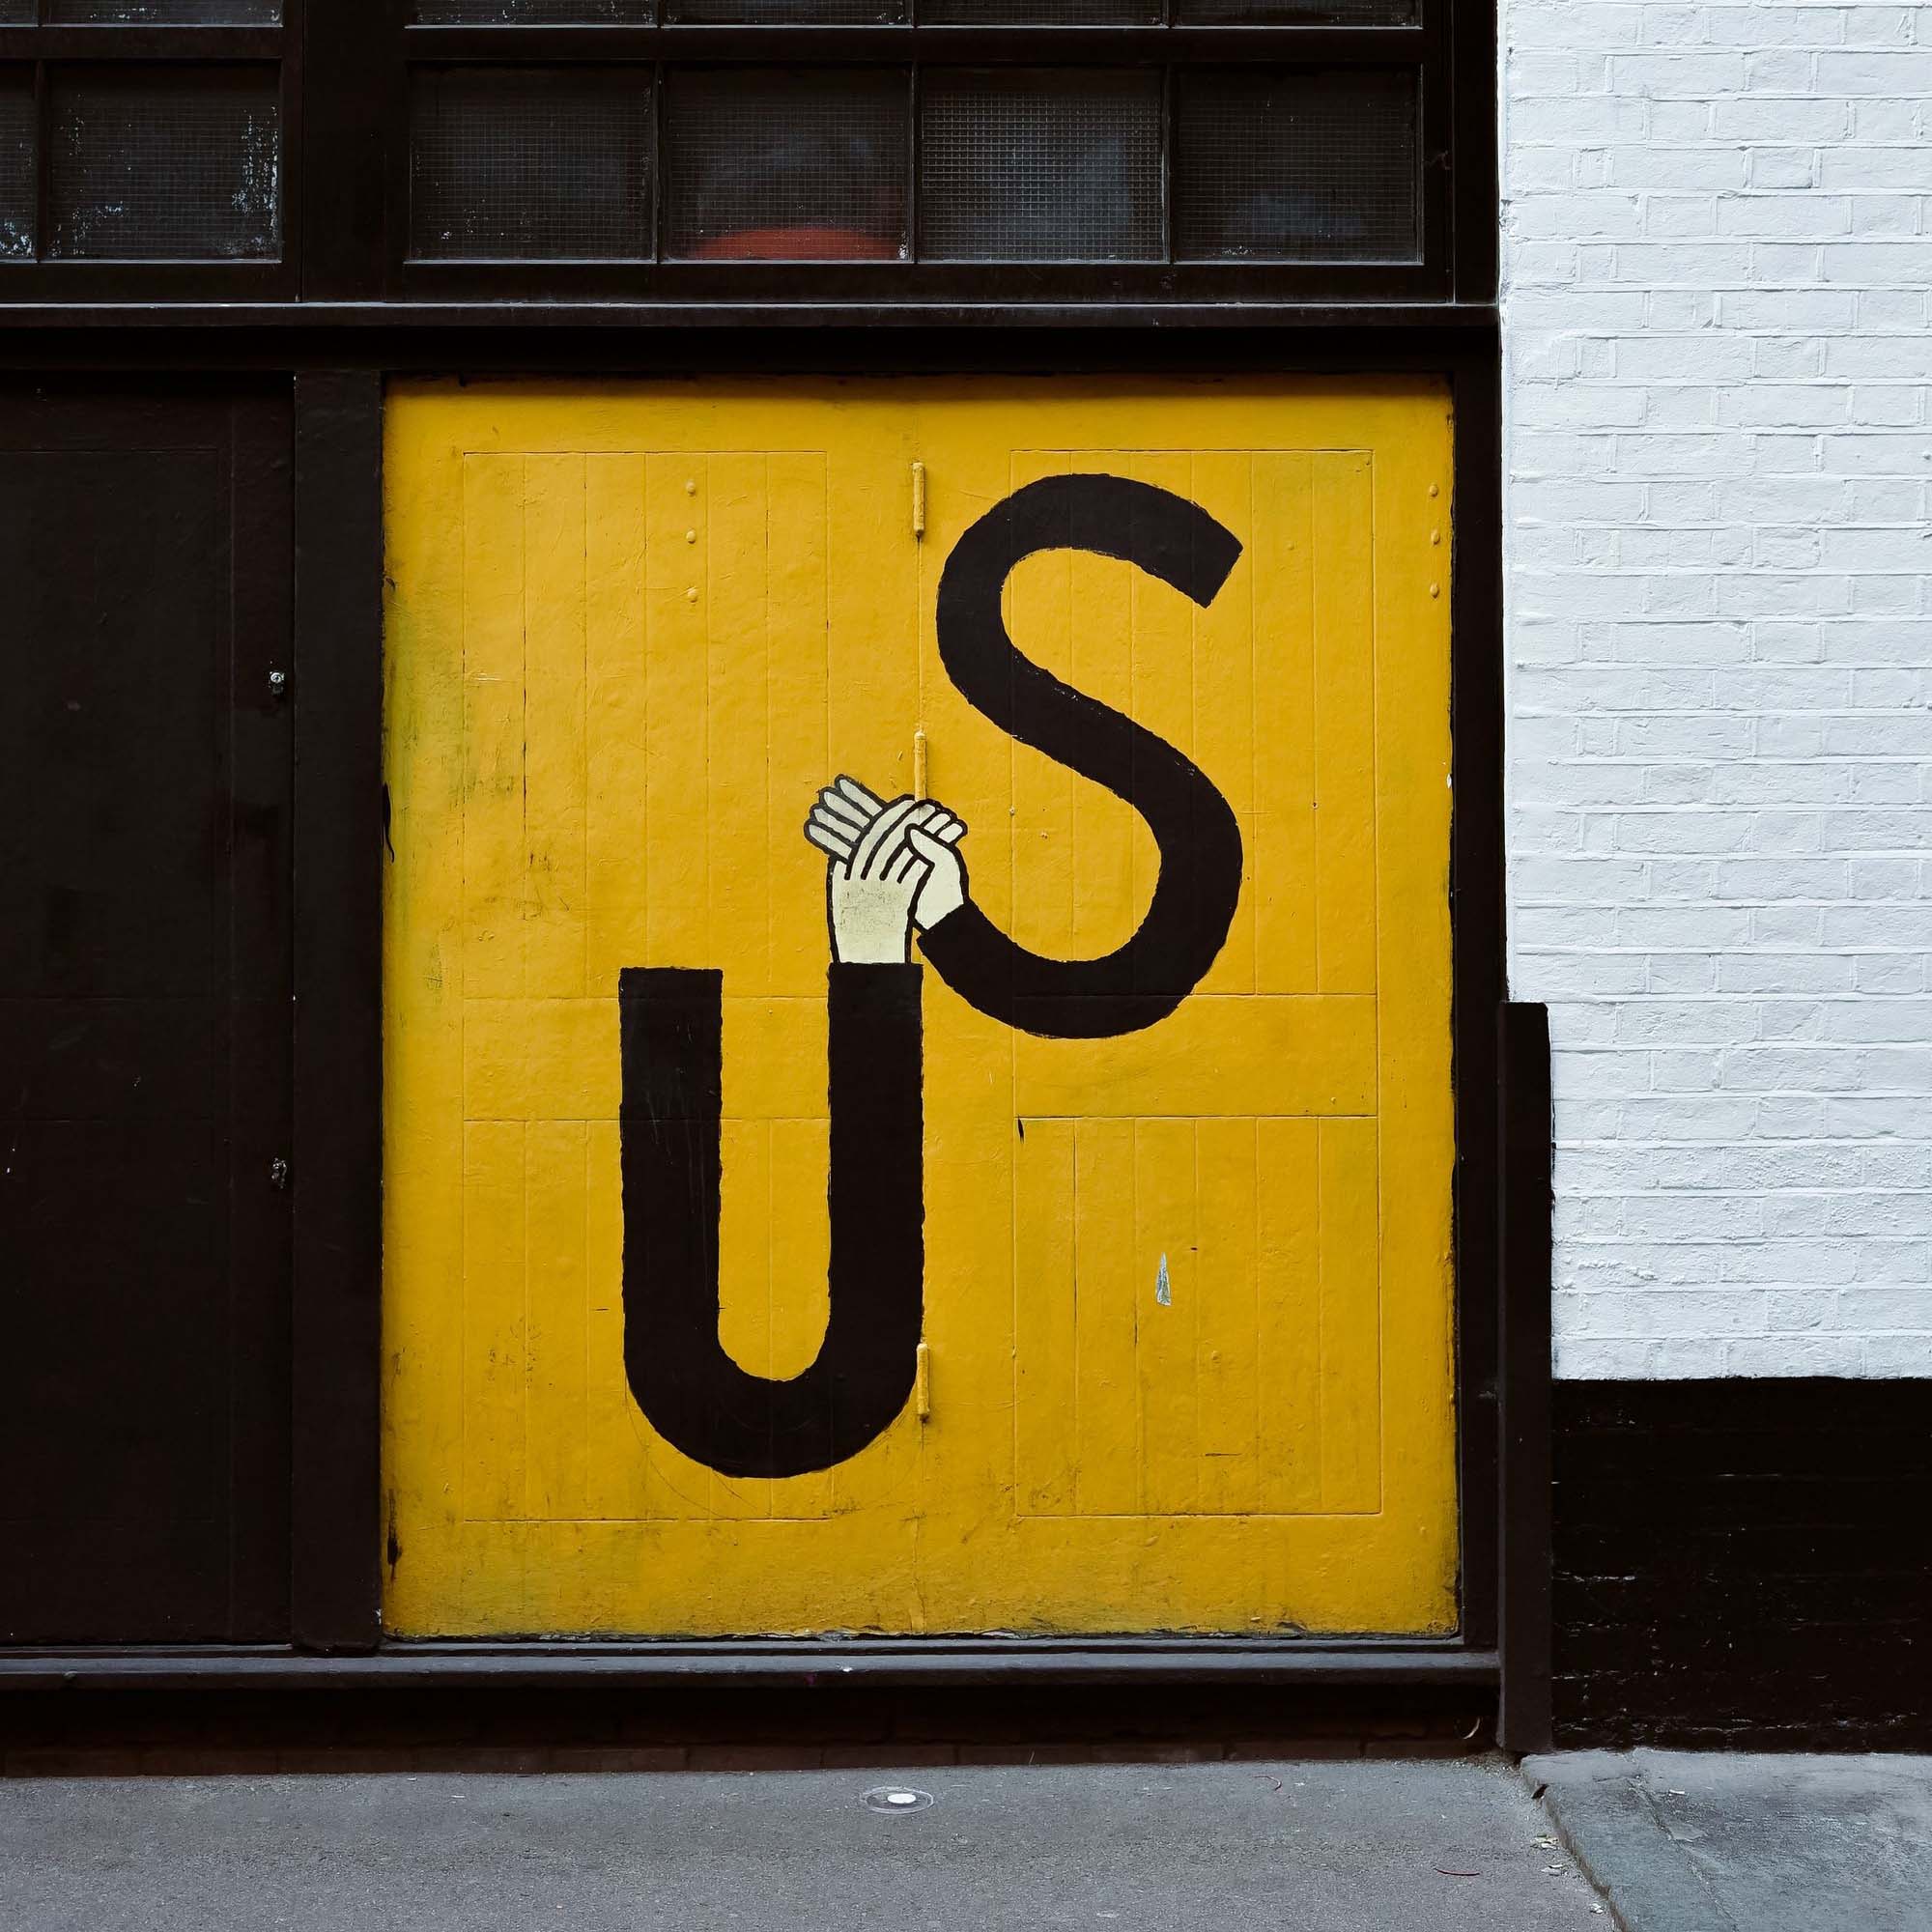 Yellow door with an illustration of the word "Us" with two hands holding